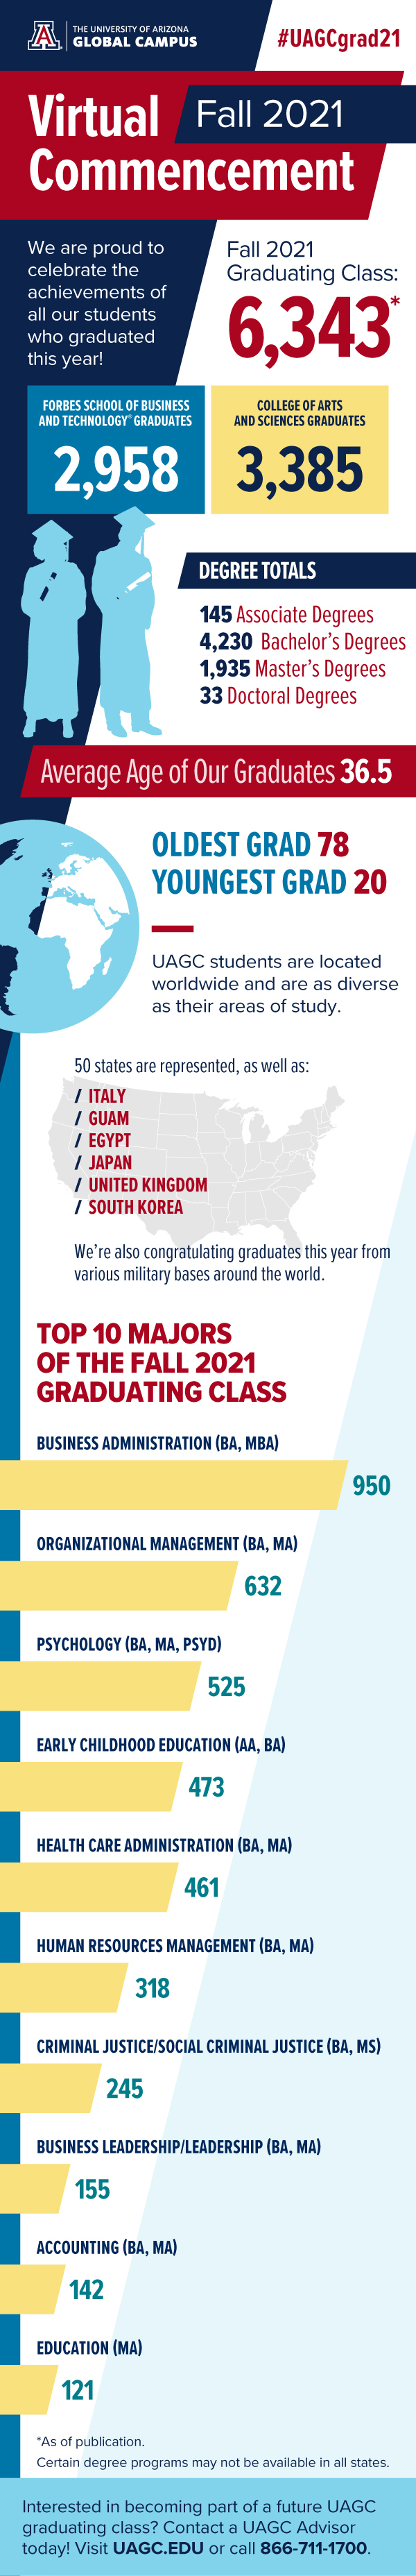 uagc fall 2021 commencement by the numbers infographic